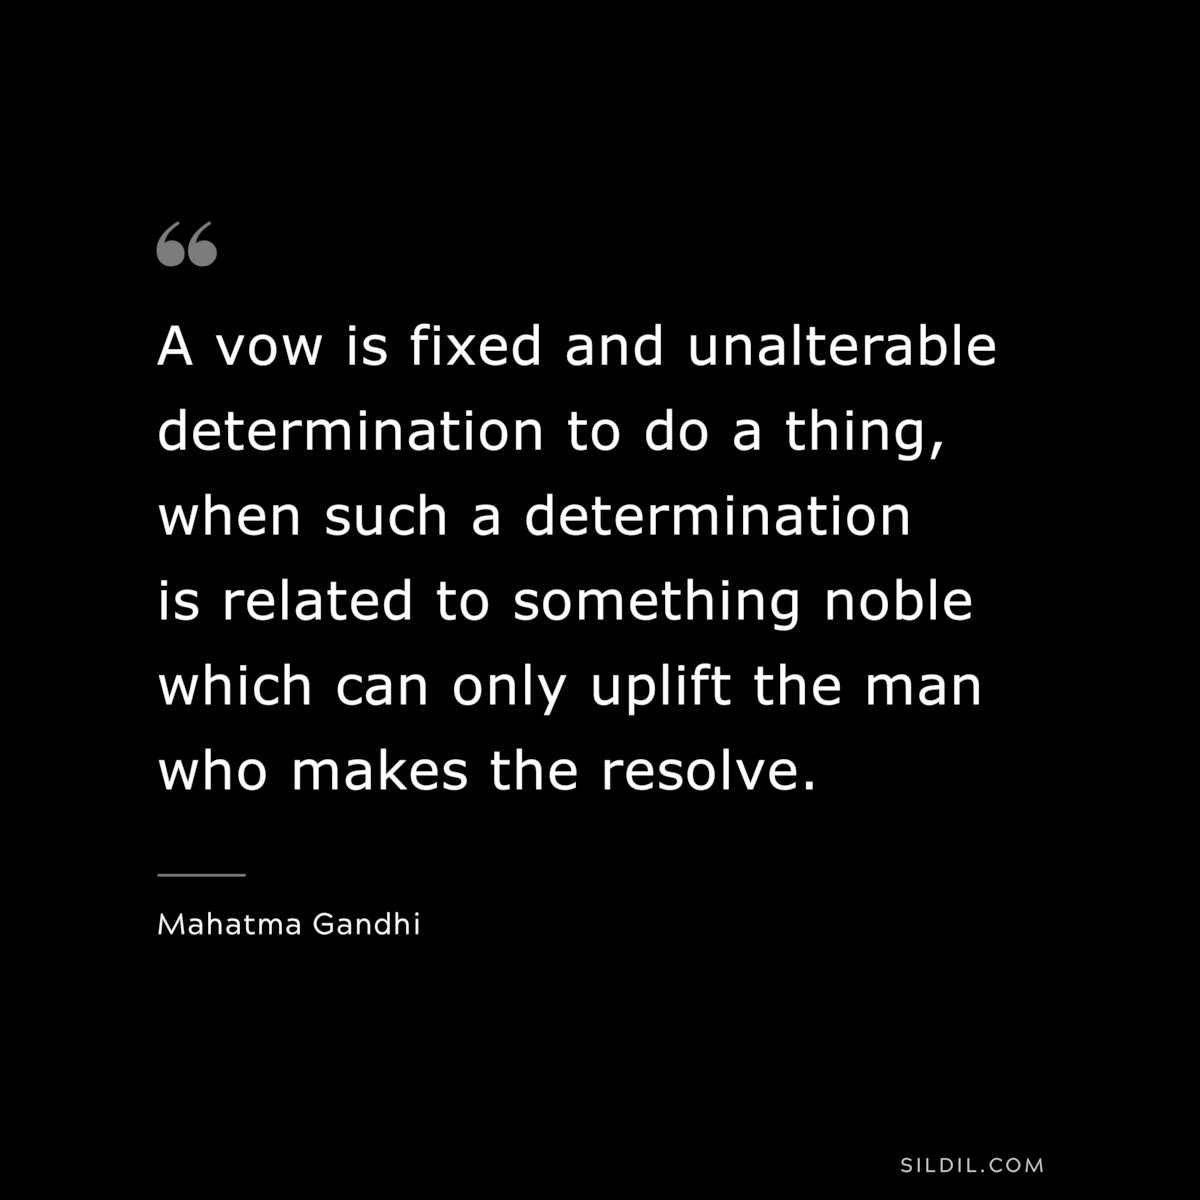 A vow is fixed and unalterable determination to do a thing, when such a determination is related to something noble which can only uplift the man who makes the resolve. ― Mahatma Gandhi